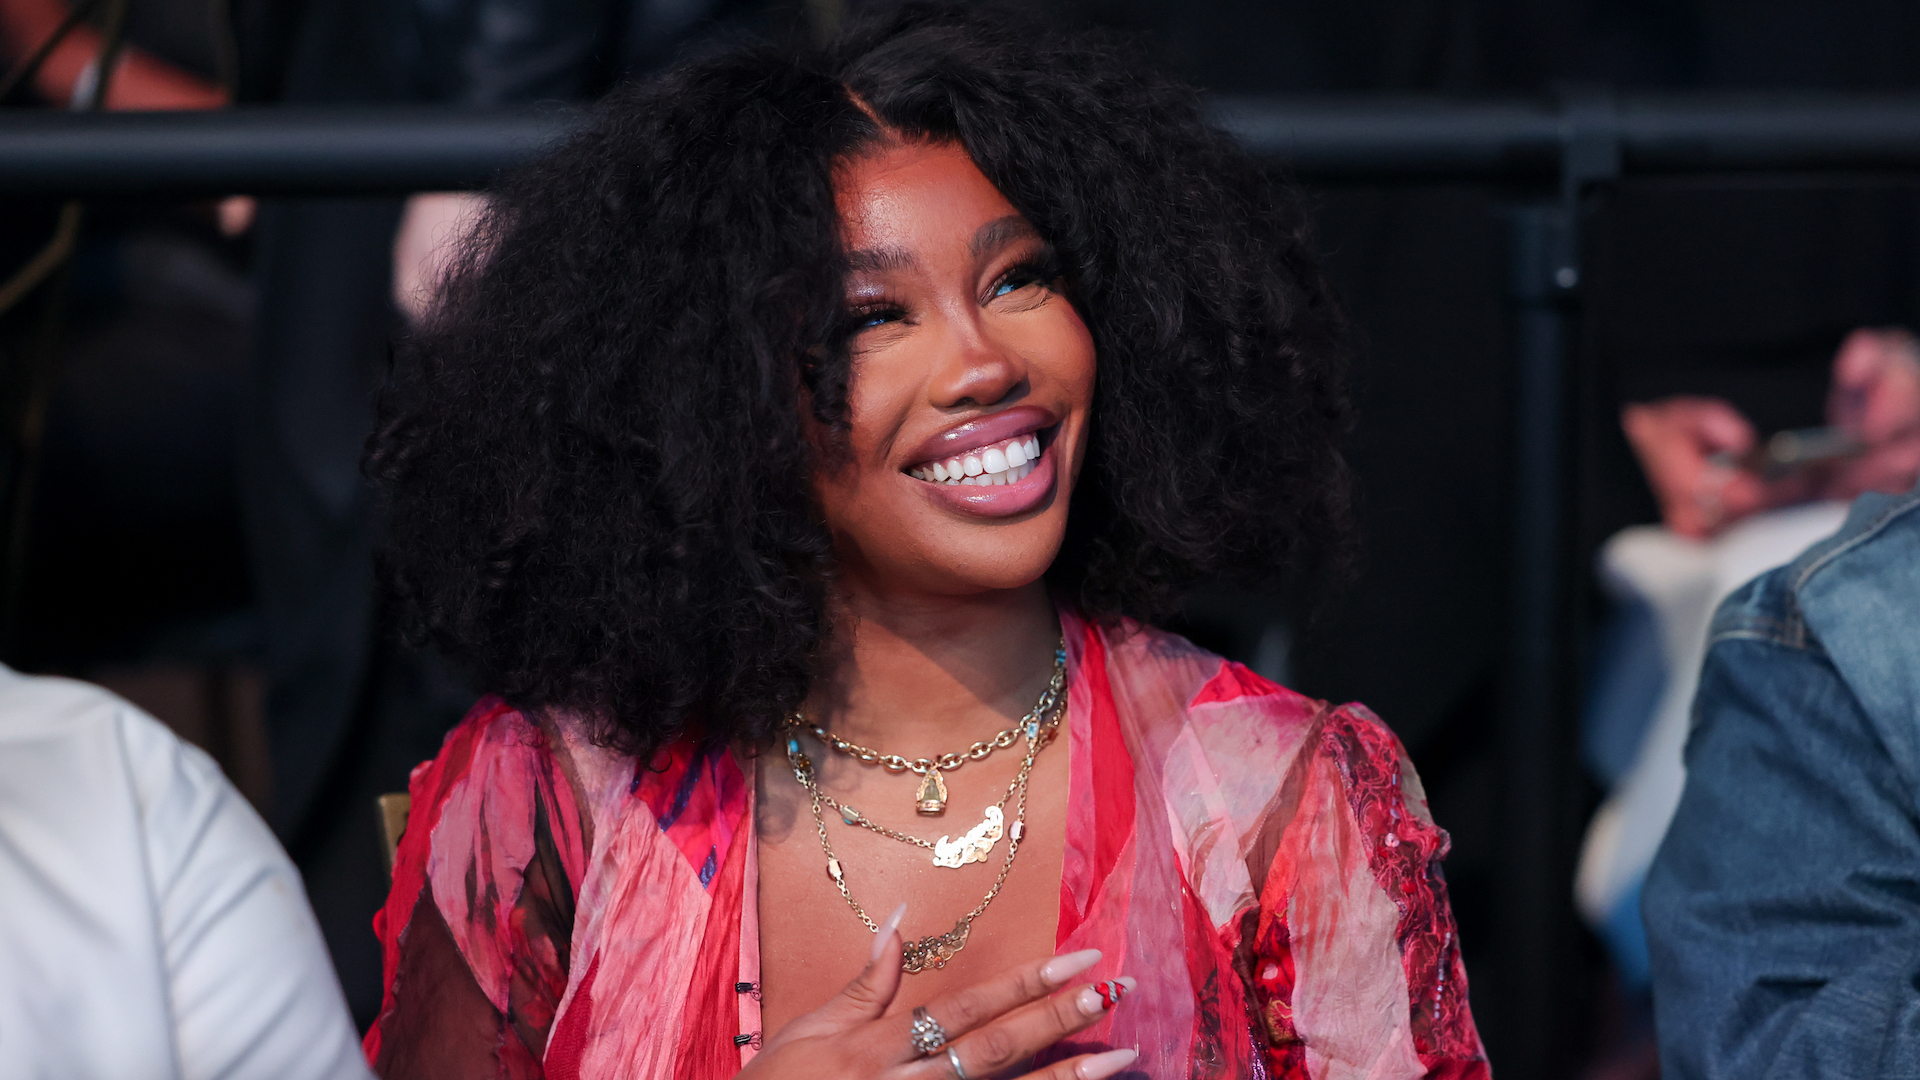 SZA Opens Up About Touring, Her BBL, And More In New Interview